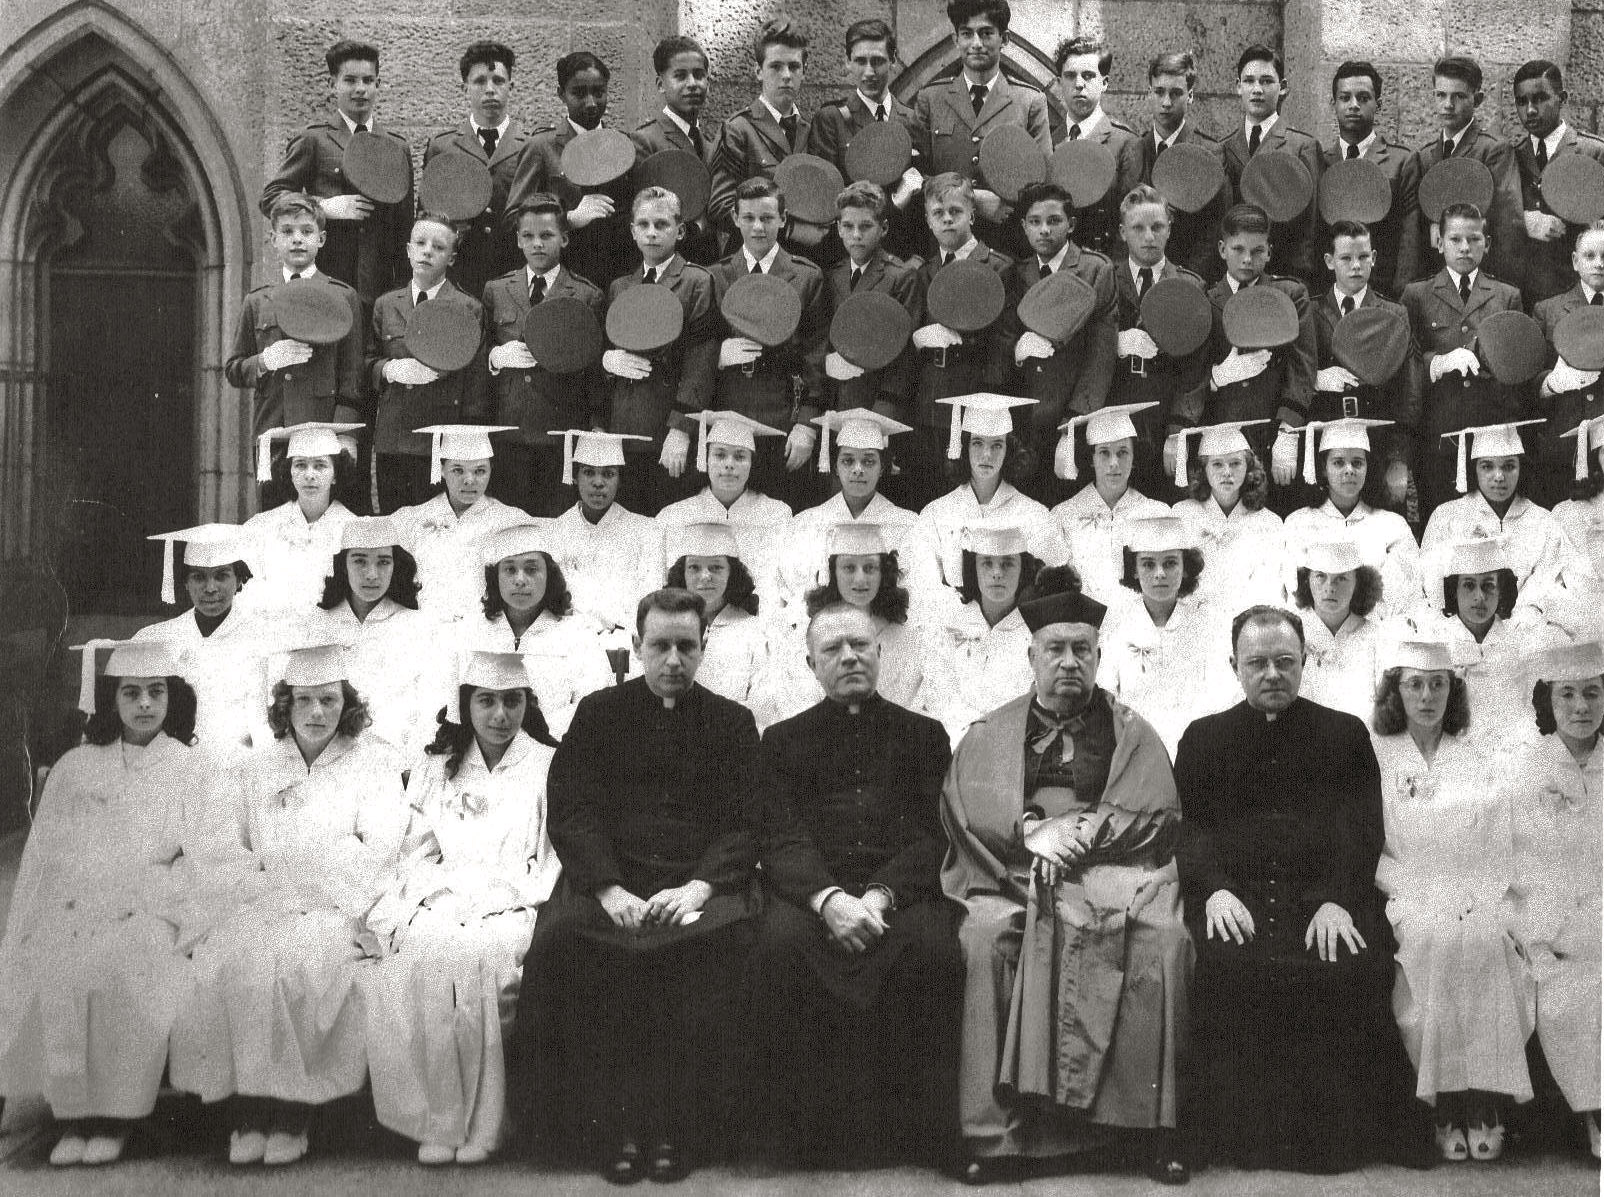 Boys and Girls  Class of 1947
Our lady of Lourdes RC School
West 143rd Street New York, N.Y.